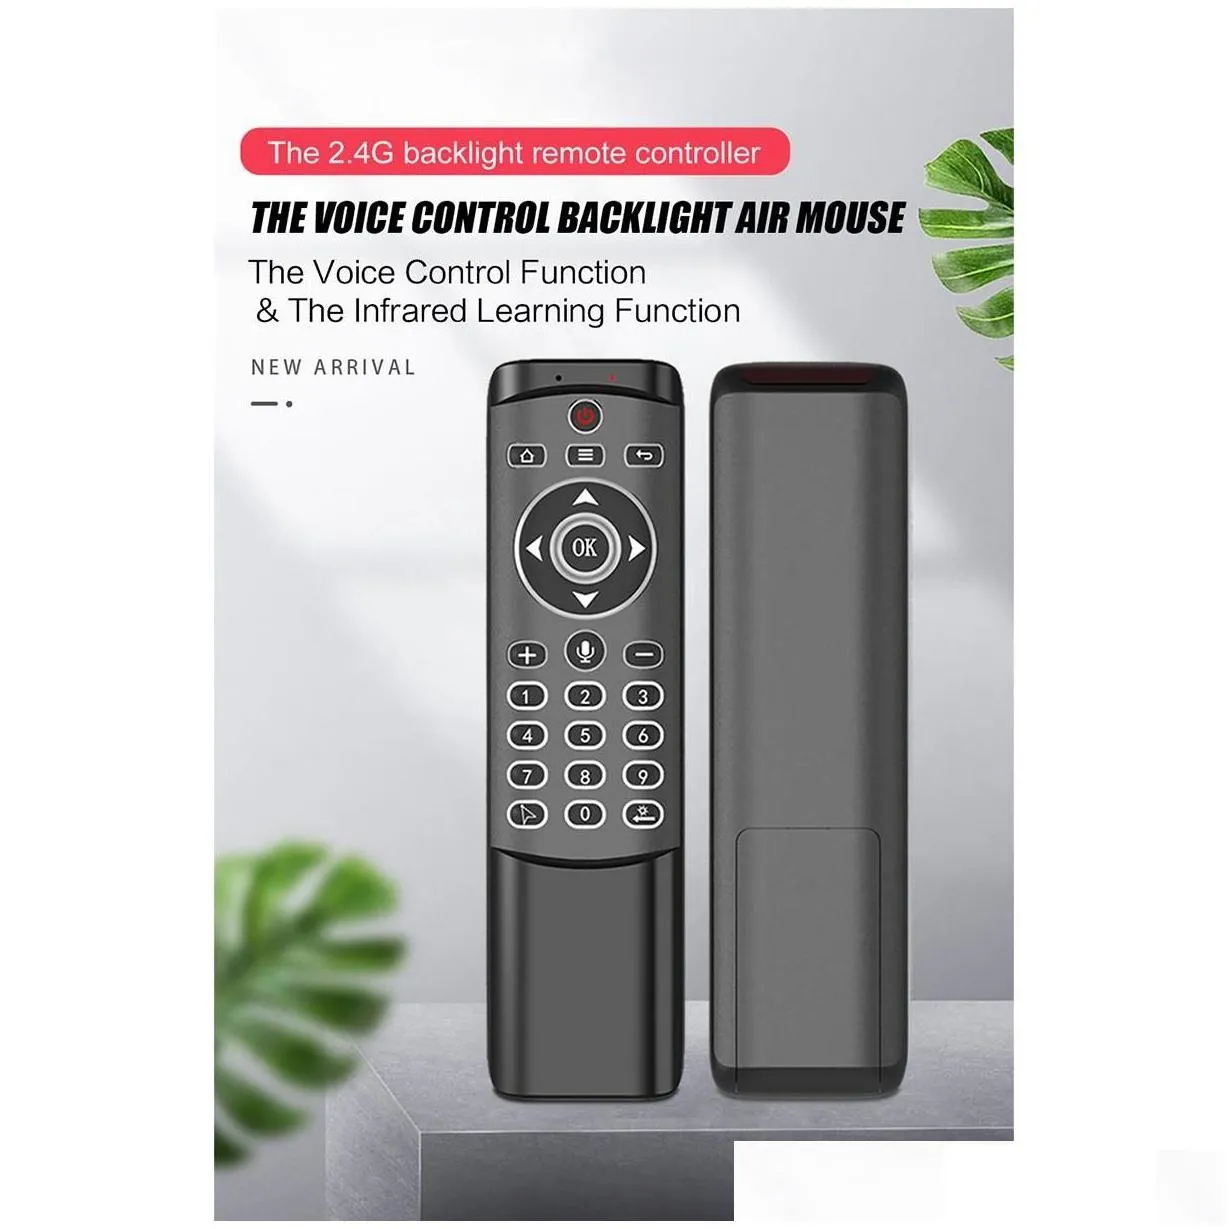 keyboards mt1 backlit voice remote control gyro wireless air mouse 2.4g for android tv box drop delivery computers networking keyboard